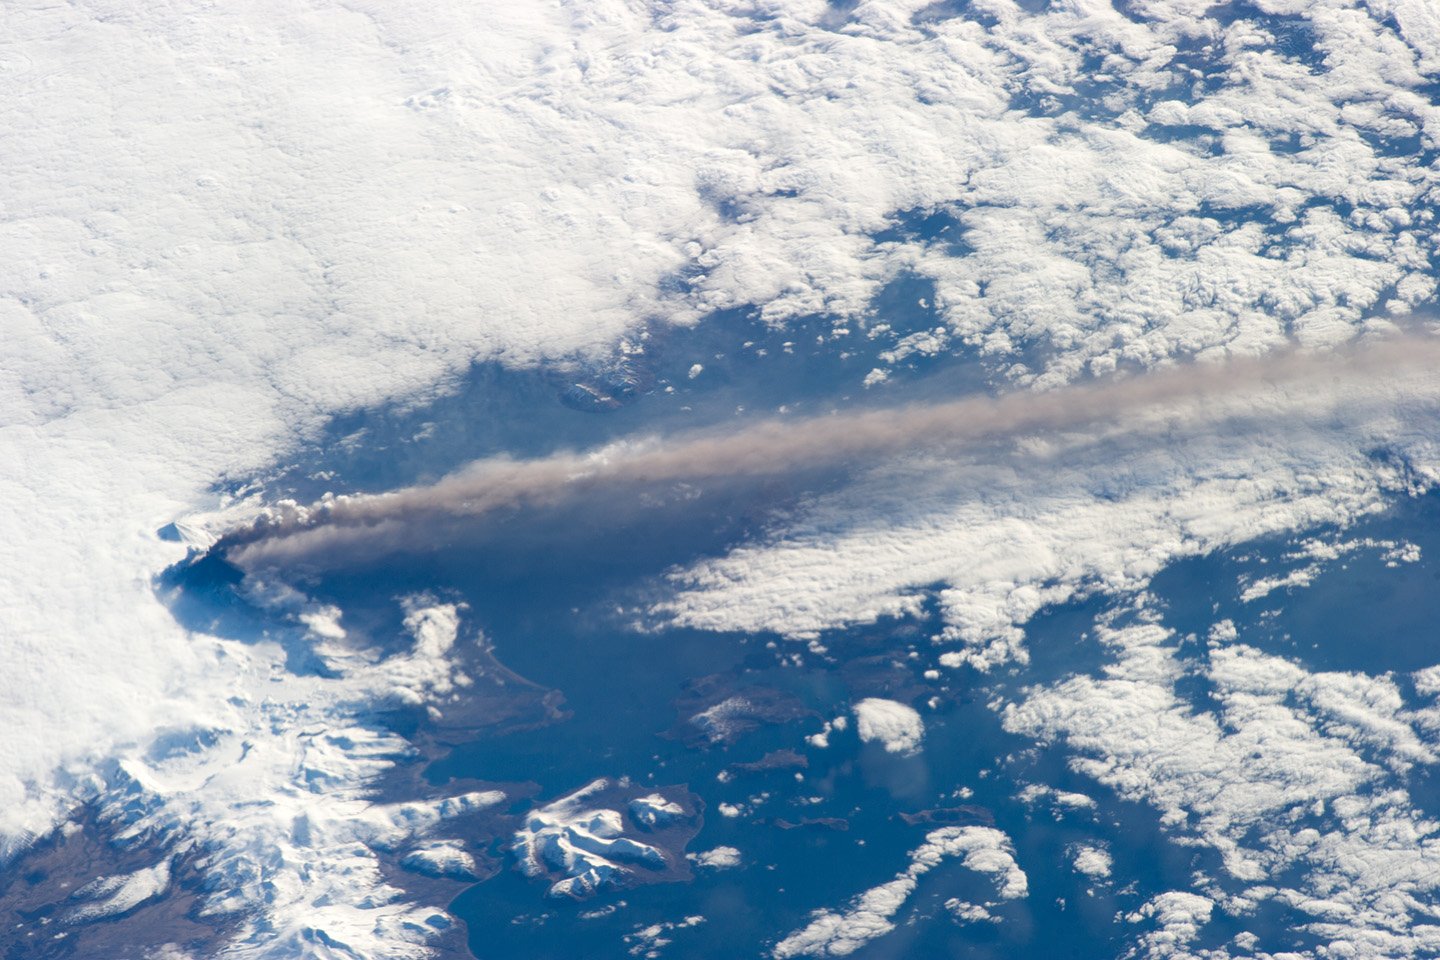 The eruption of Alaska’s Pavlof Volcano as seen from the International Space Station May 18, 2013